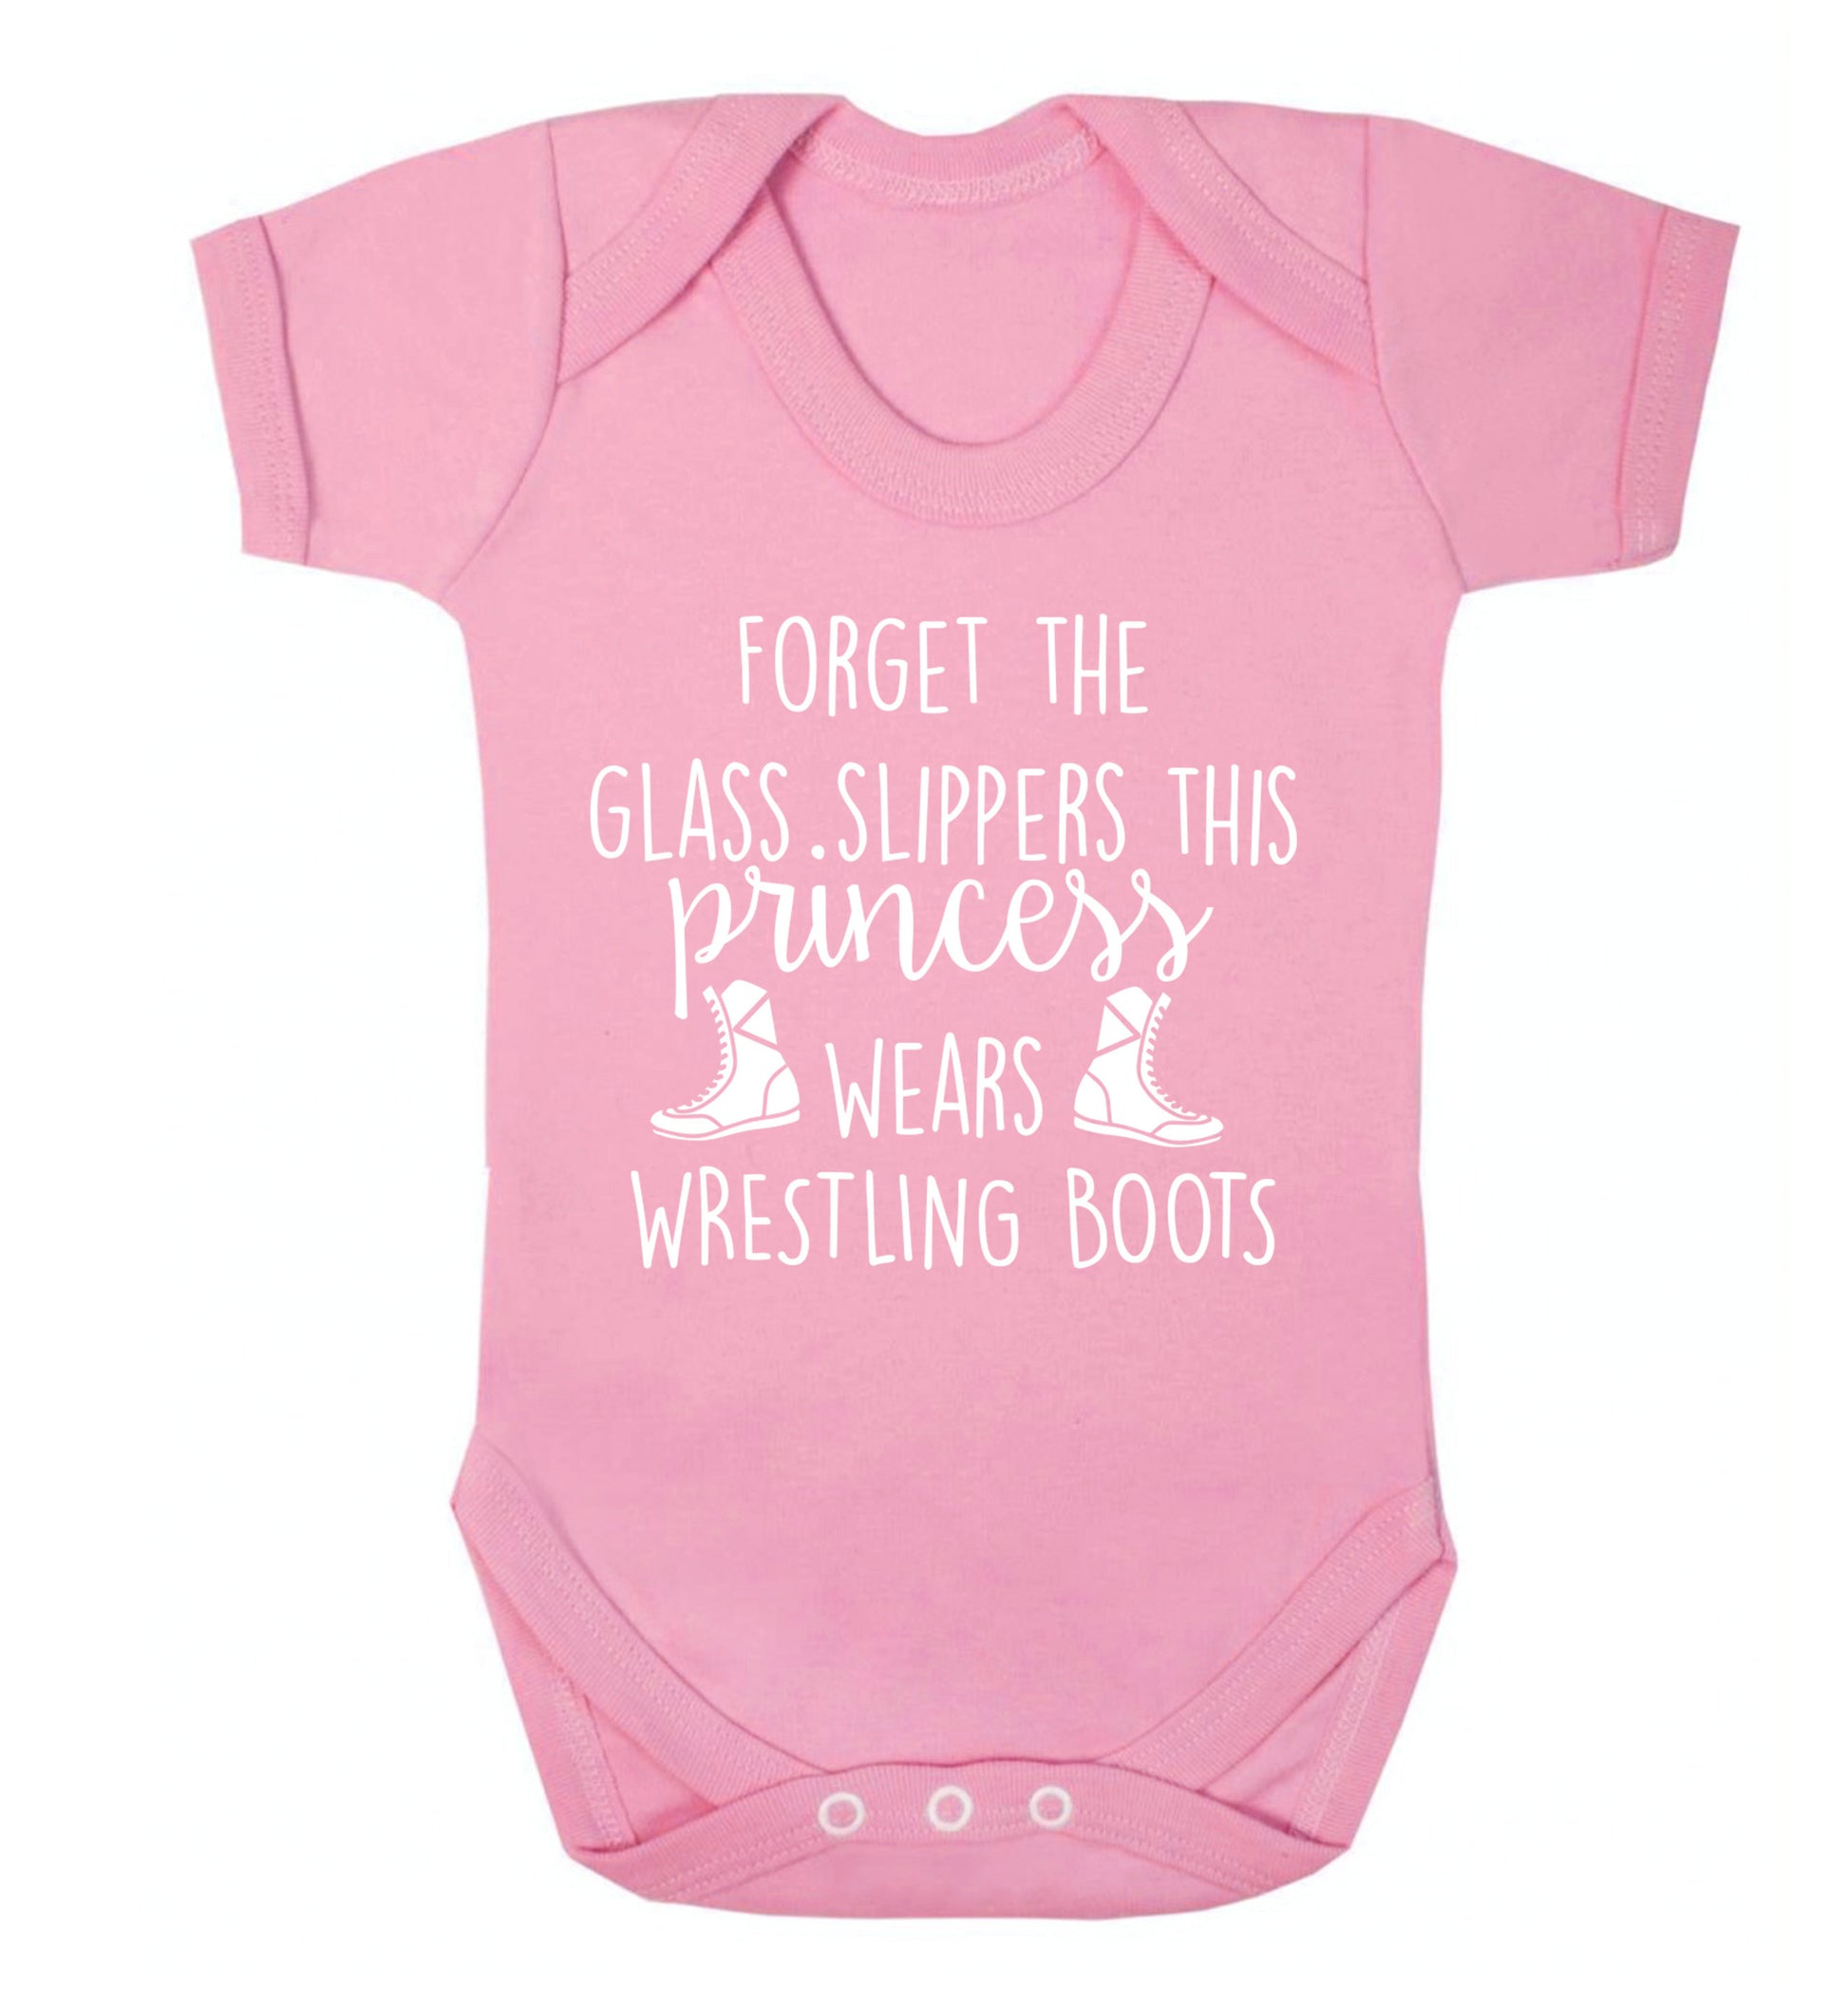 Forget the glass slippers this princess wears wrestling boots Baby Vest pale pink 18-24 months